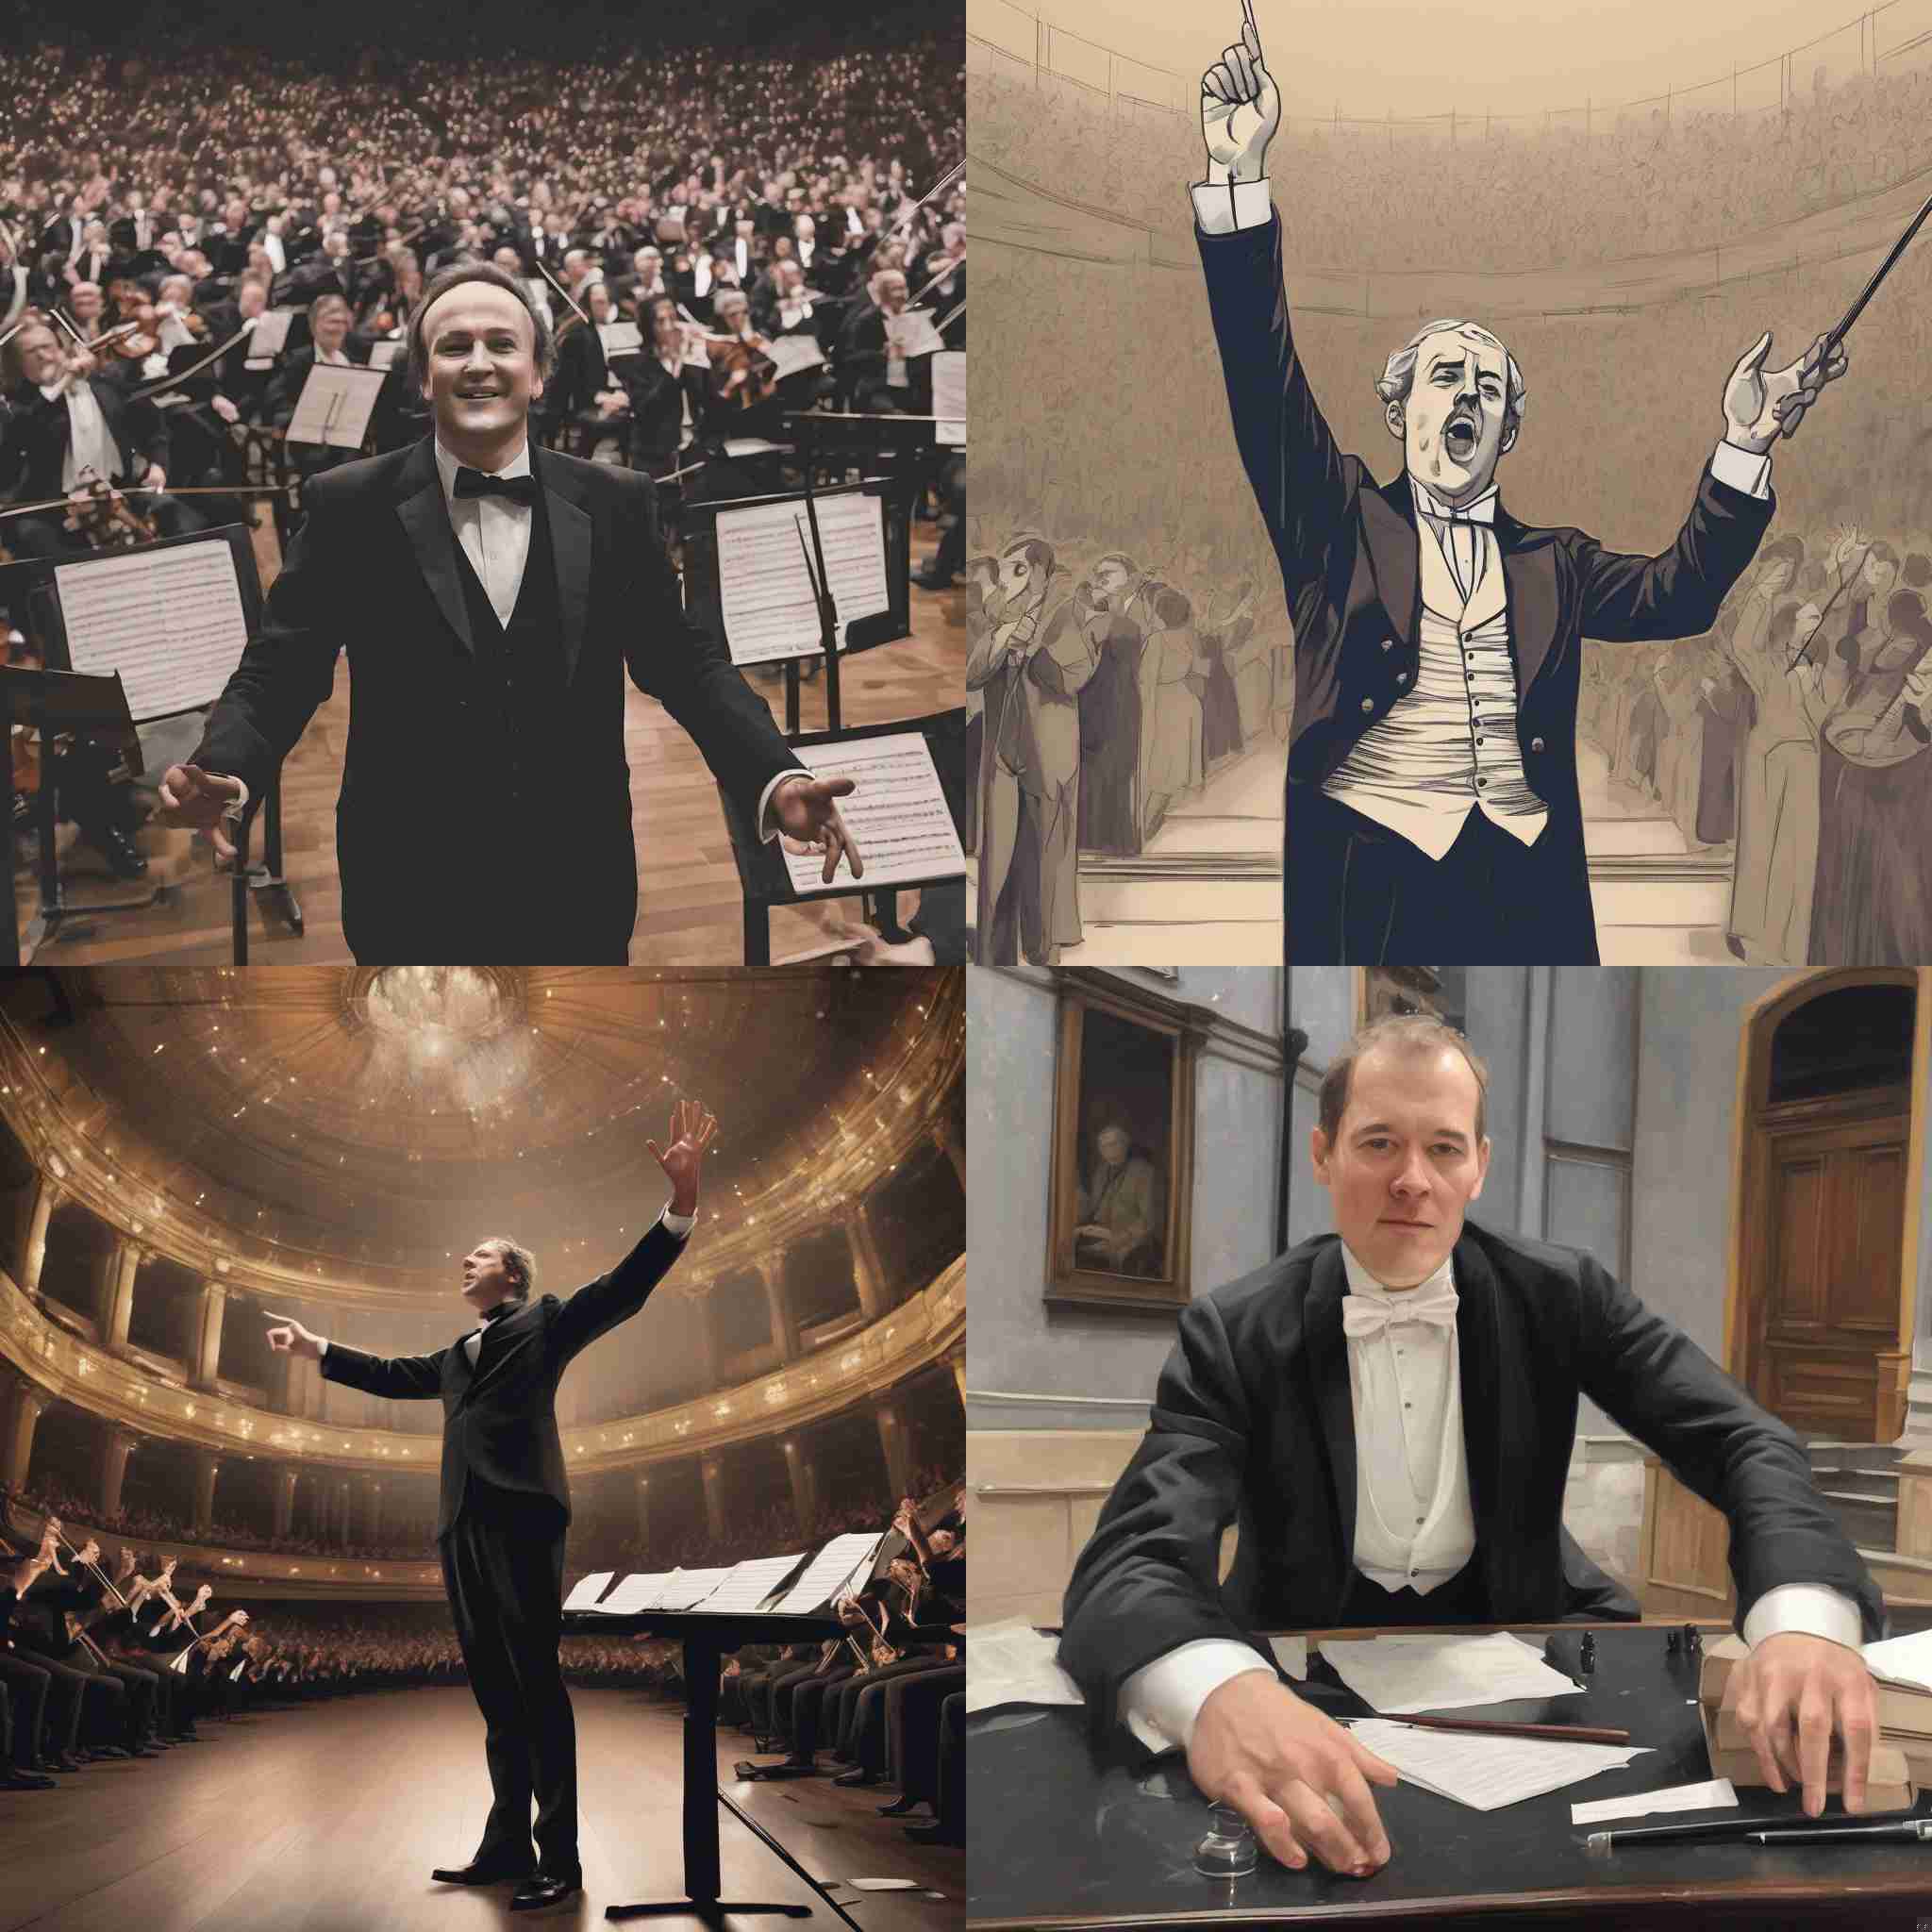 A conductor after the concert